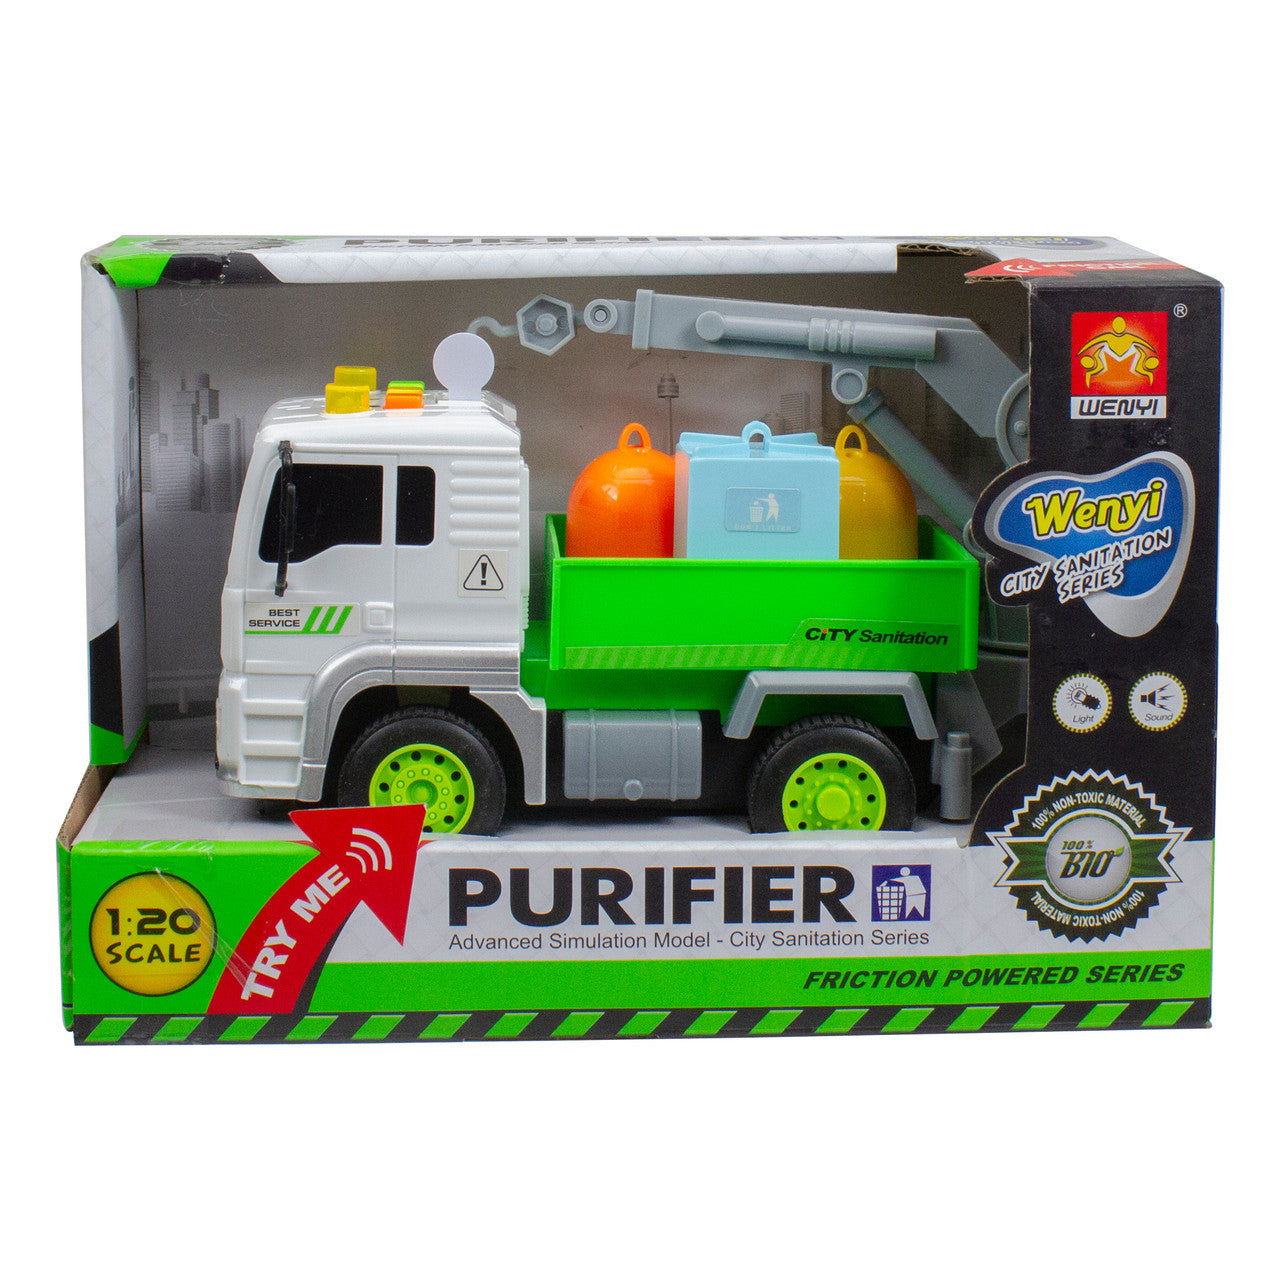 Purifier Friction Powered